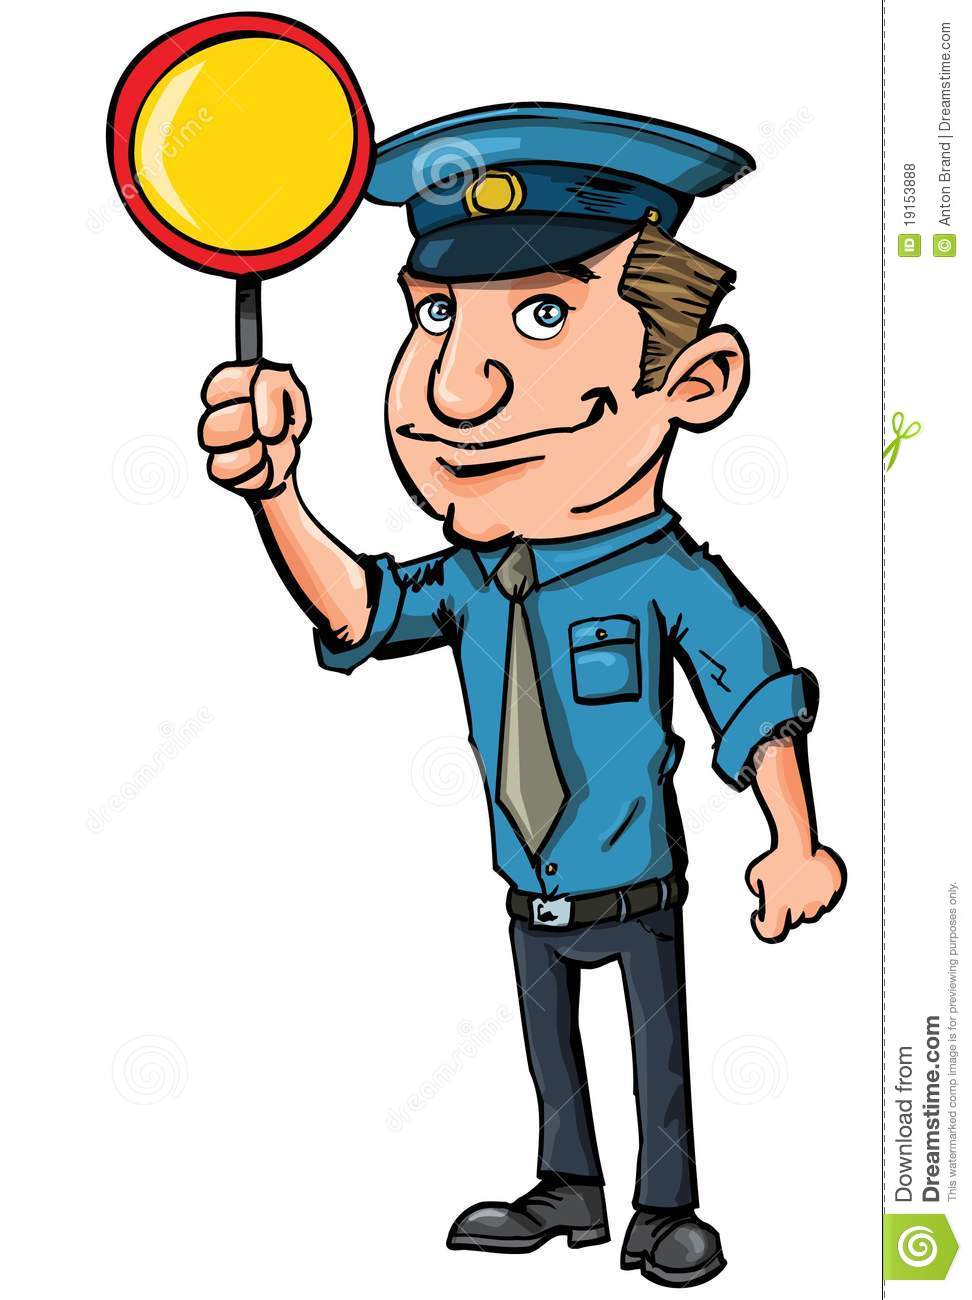 Airport clipart security guard. Cliparts